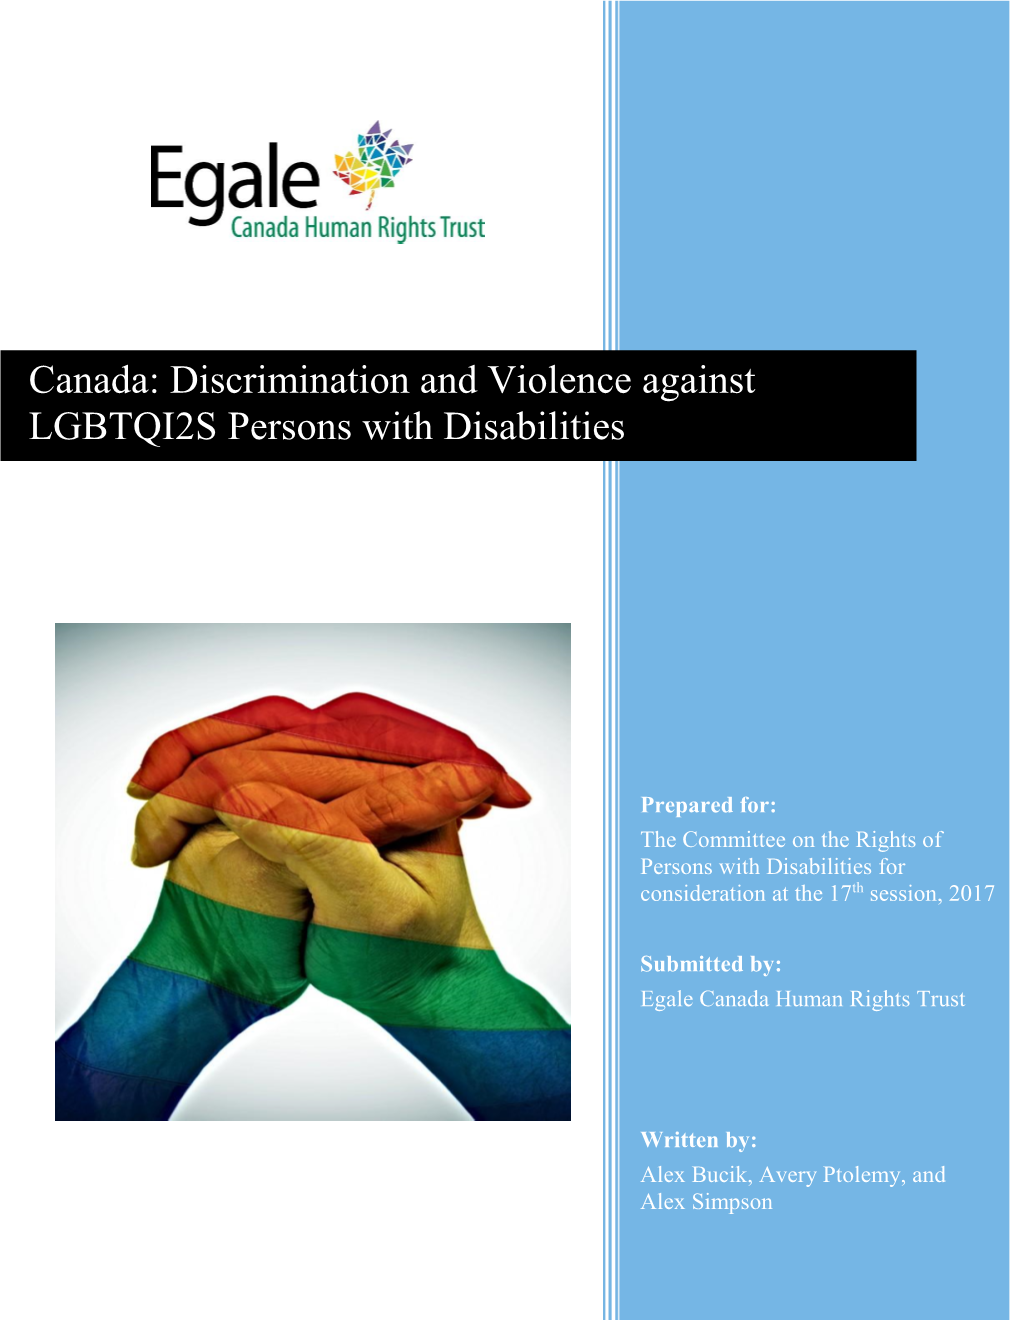 Discrimination and Violence Against LGBTQI2S Persons with Disabilities